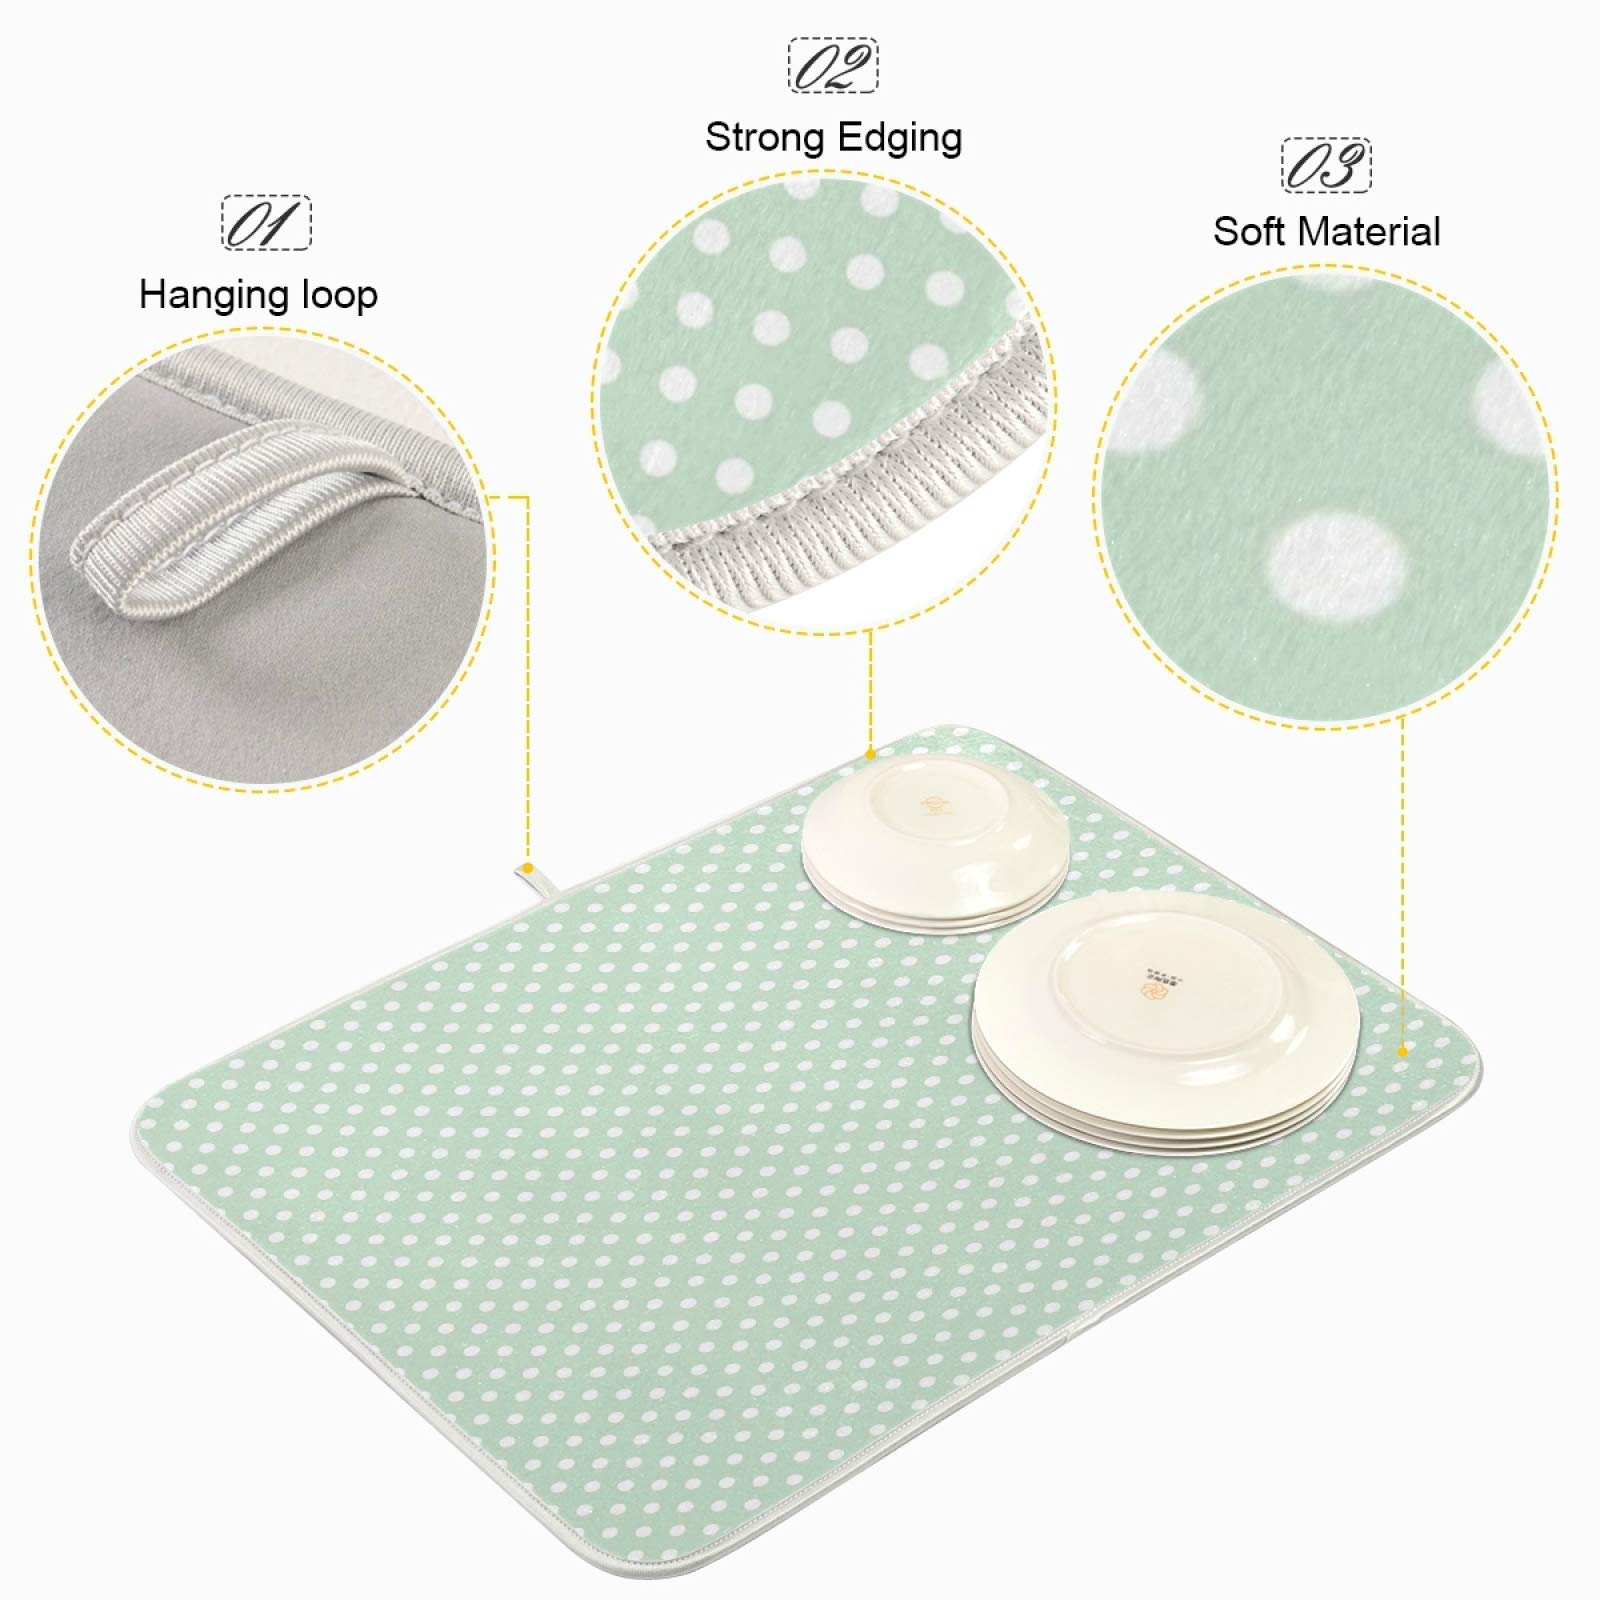 Mint Green Polka Dots Dish Drying Mat 16x18 for Kitchen Counter Cute Pastel Microfiber Dishes Pad Dish Drainer Rack Mats Absorbent Coffee Bar Mats Quick Drying Kitchen Accessories